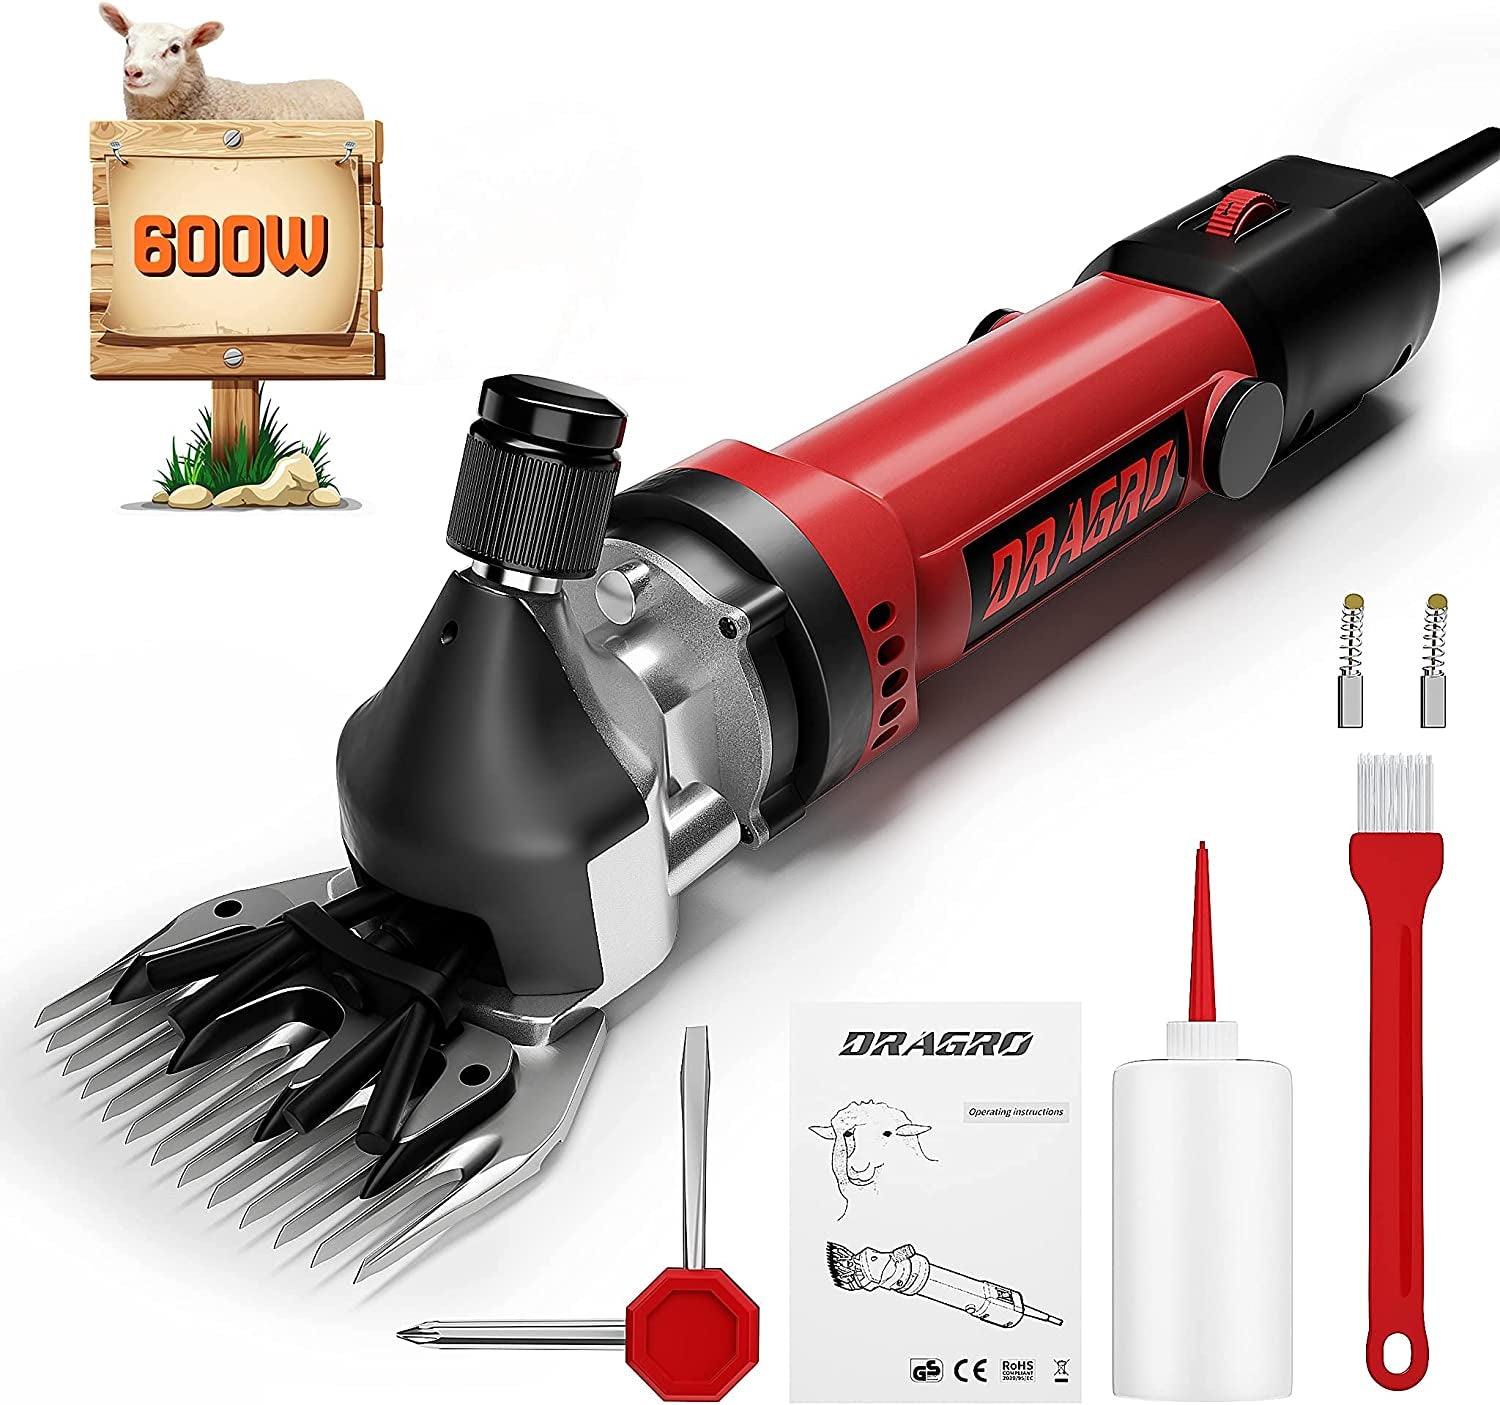 Sheep Clippers 600W, Professional Animal Shearing Machine, Farm Livestock Grooming Kit, Heavy Duty Electric Clippers for Thick Coat Animals (Sheep Clippers-600W)